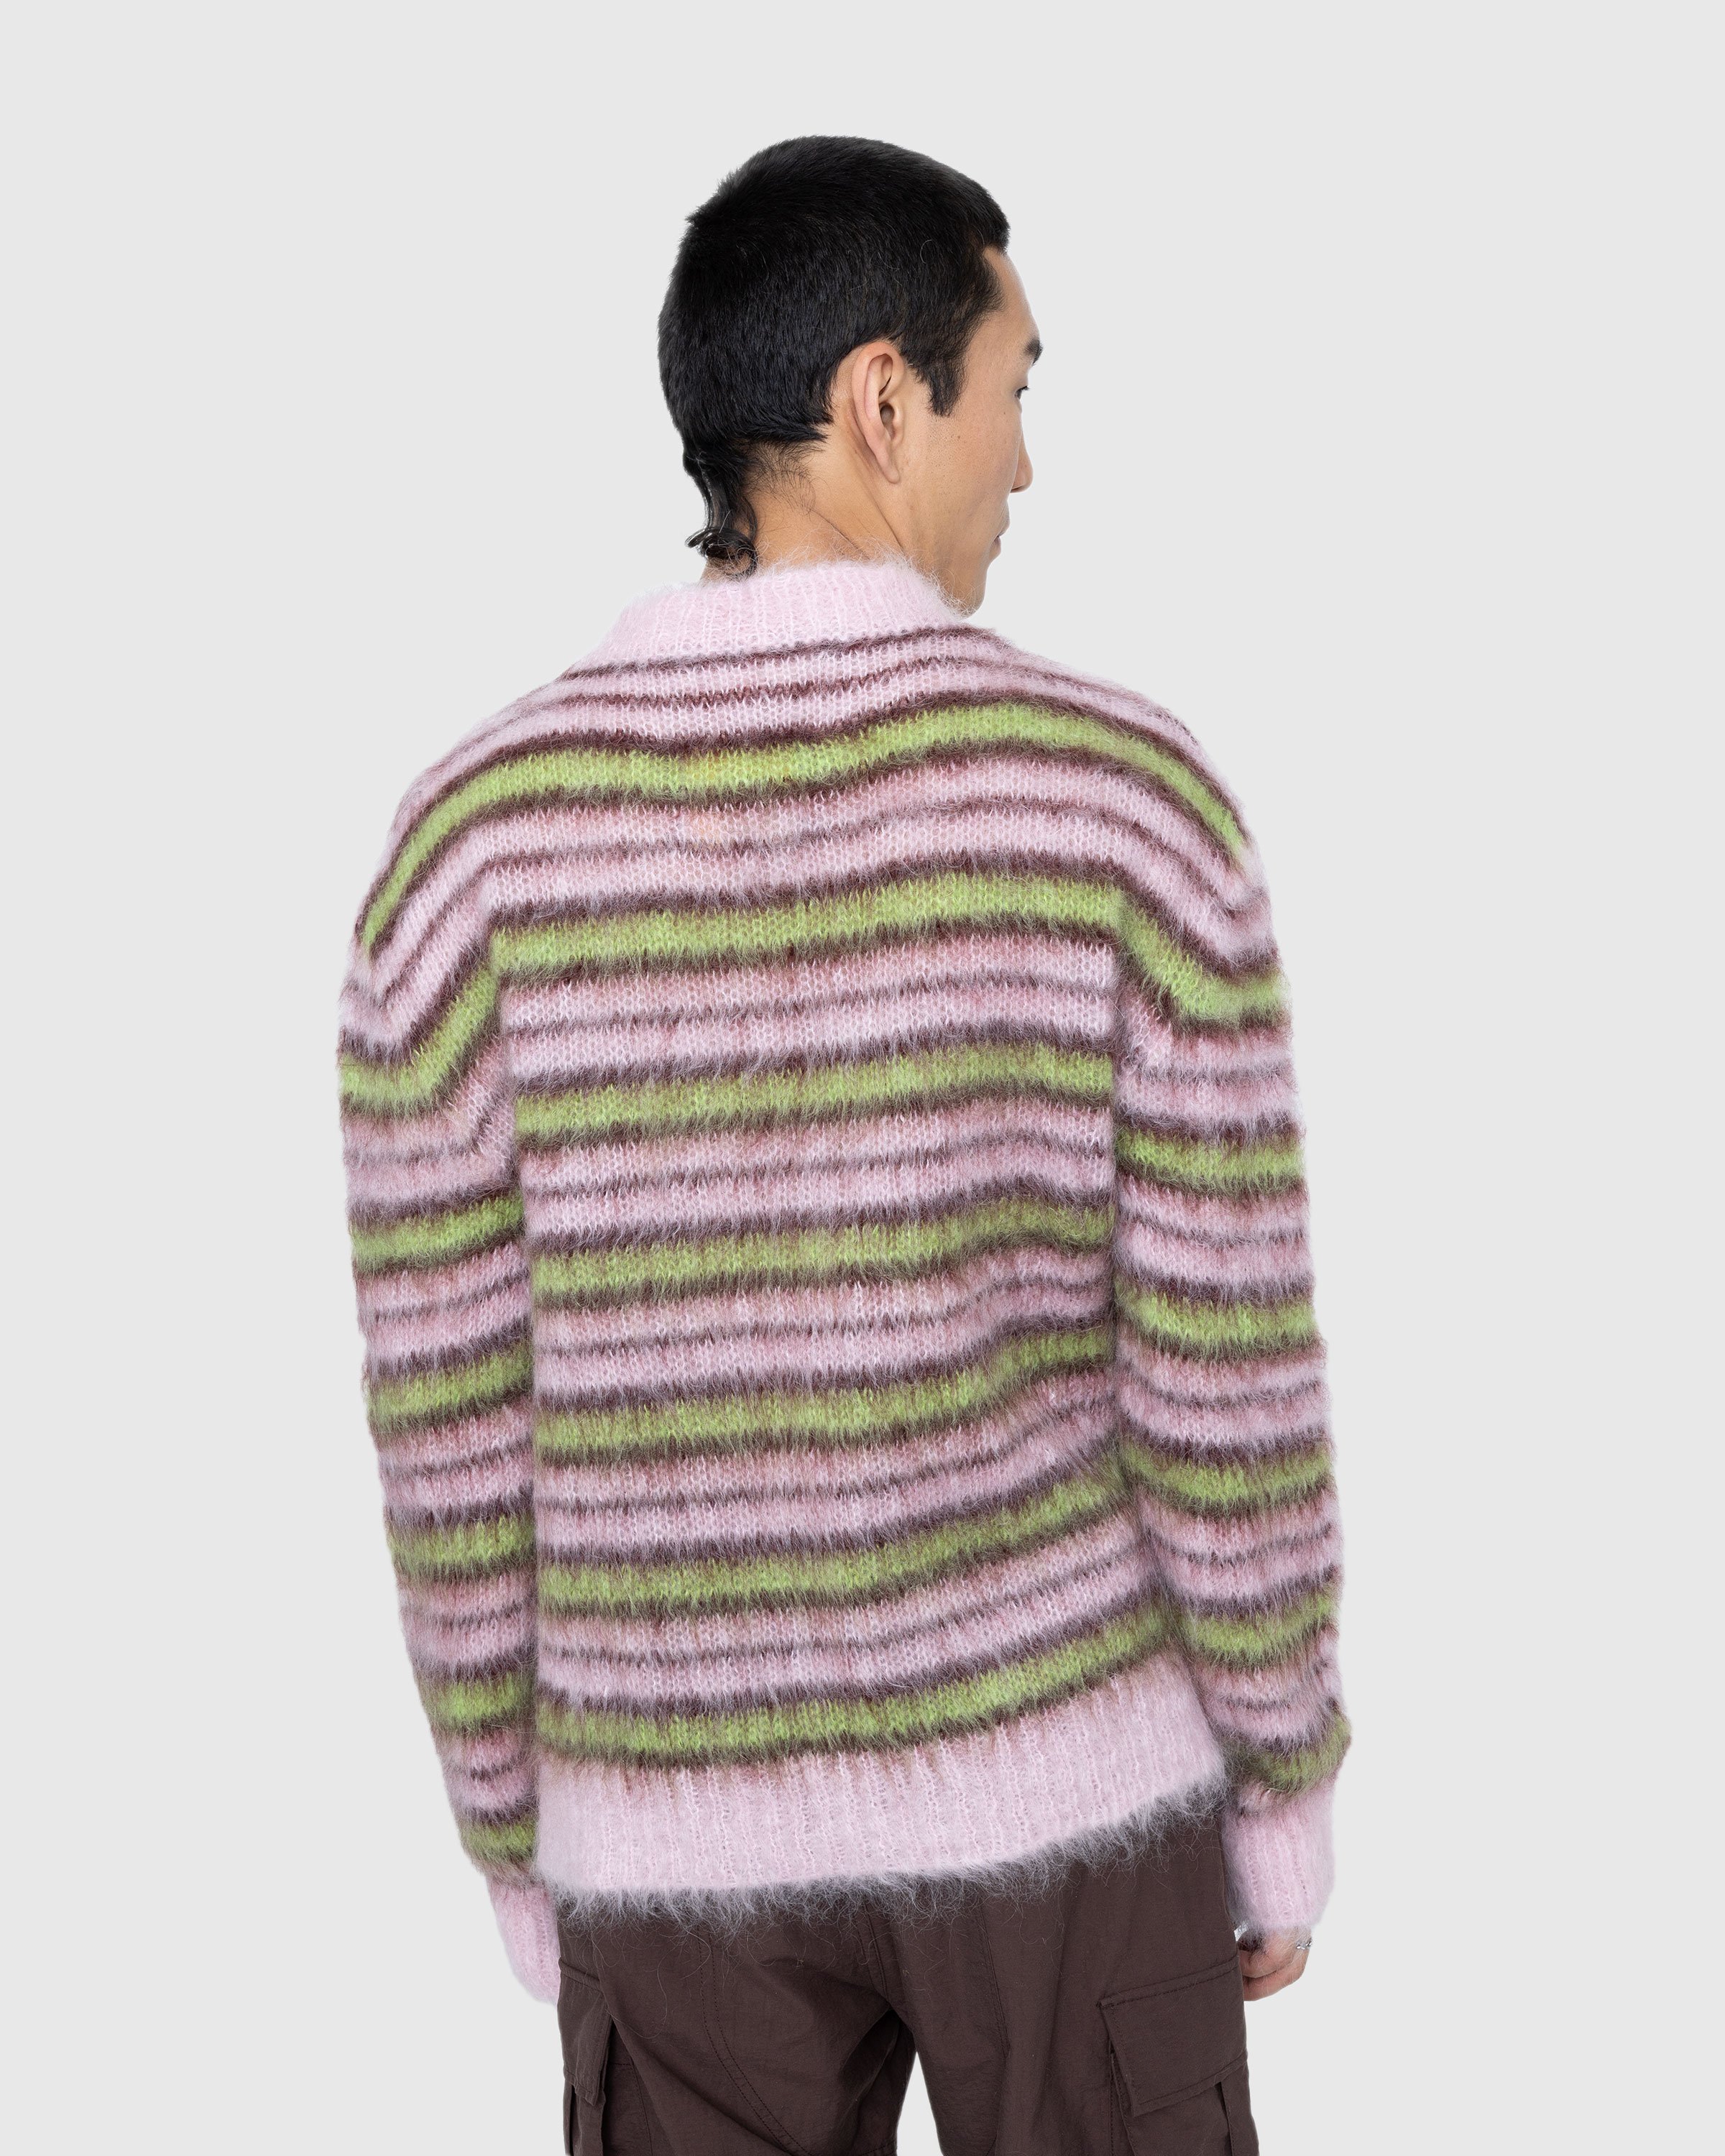 Marni - Striped Mohair Sweater Multi - Clothing - Pink - Image 3